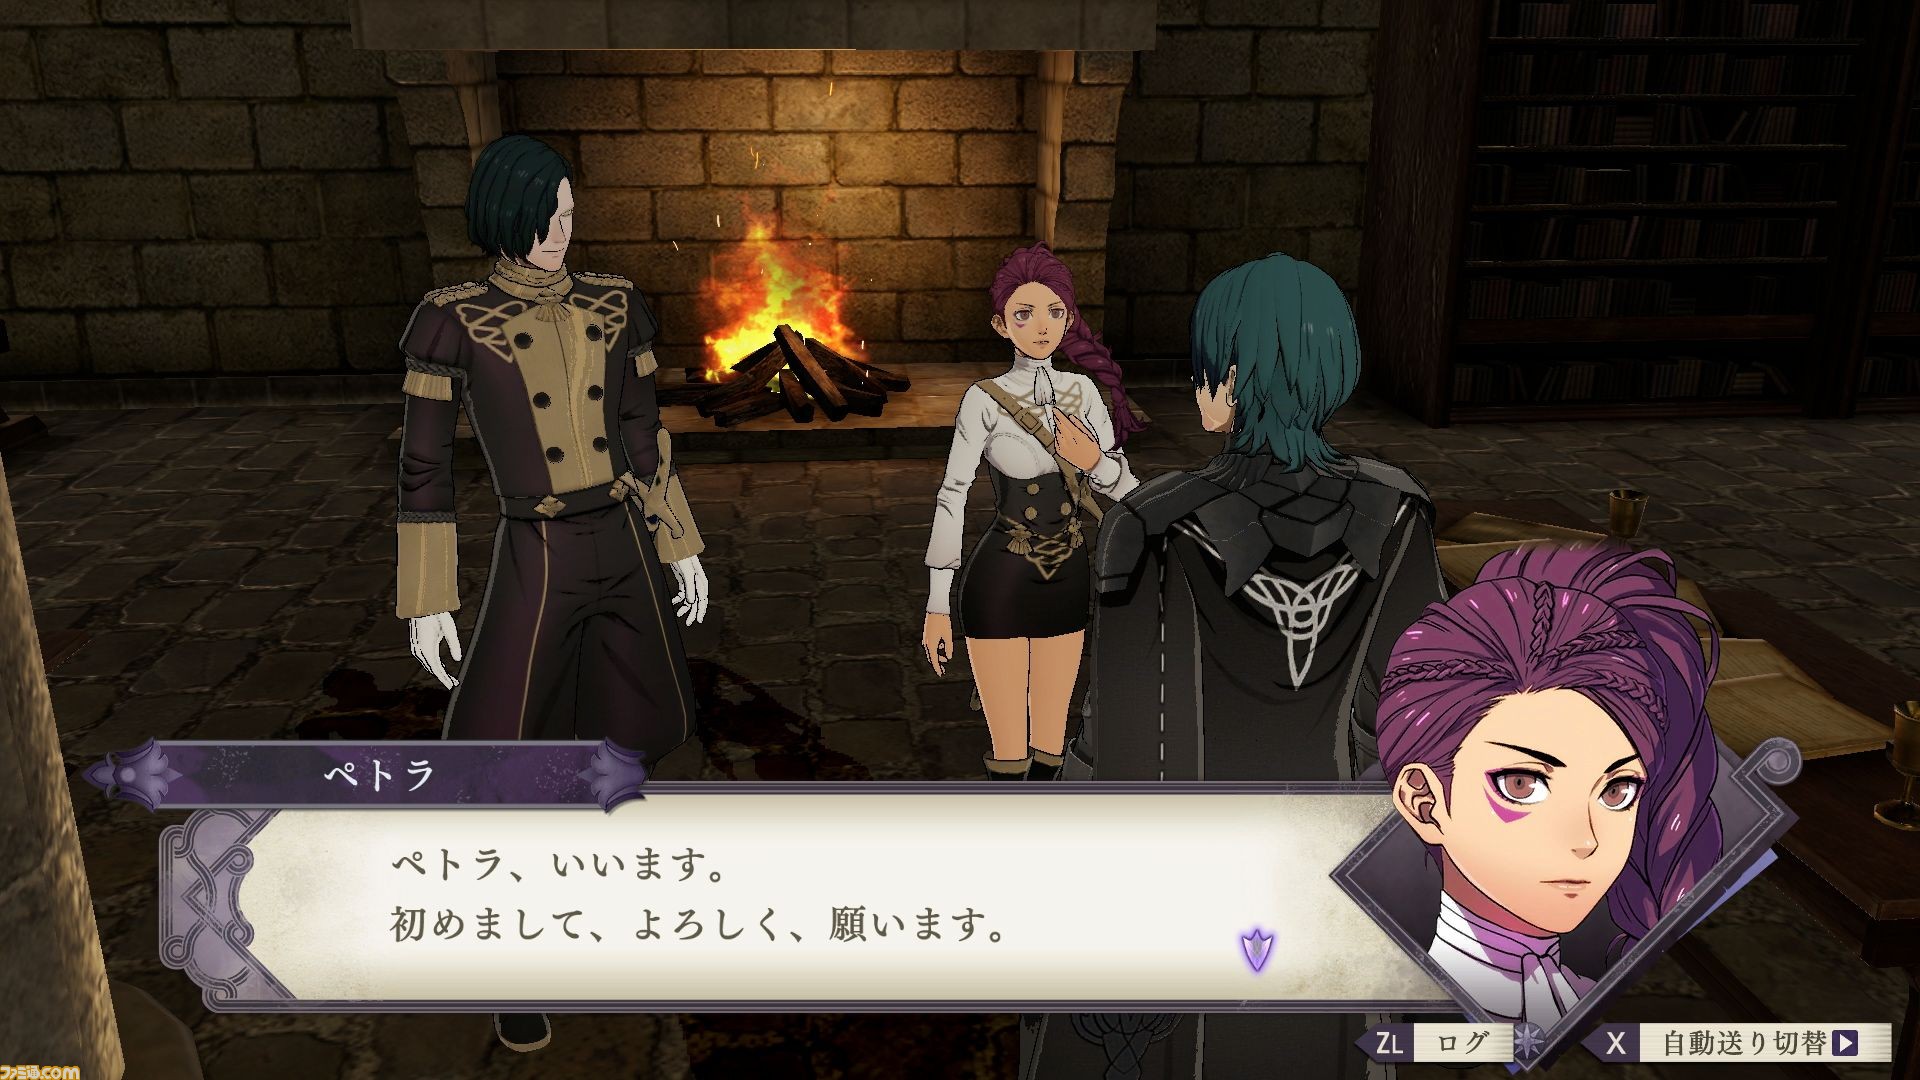 https://www.perfectly-nintendo.com/wp-content/uploads/sites/1/nggallery/fire-emblem-three-houses-25-04-2019-1/65.jpg